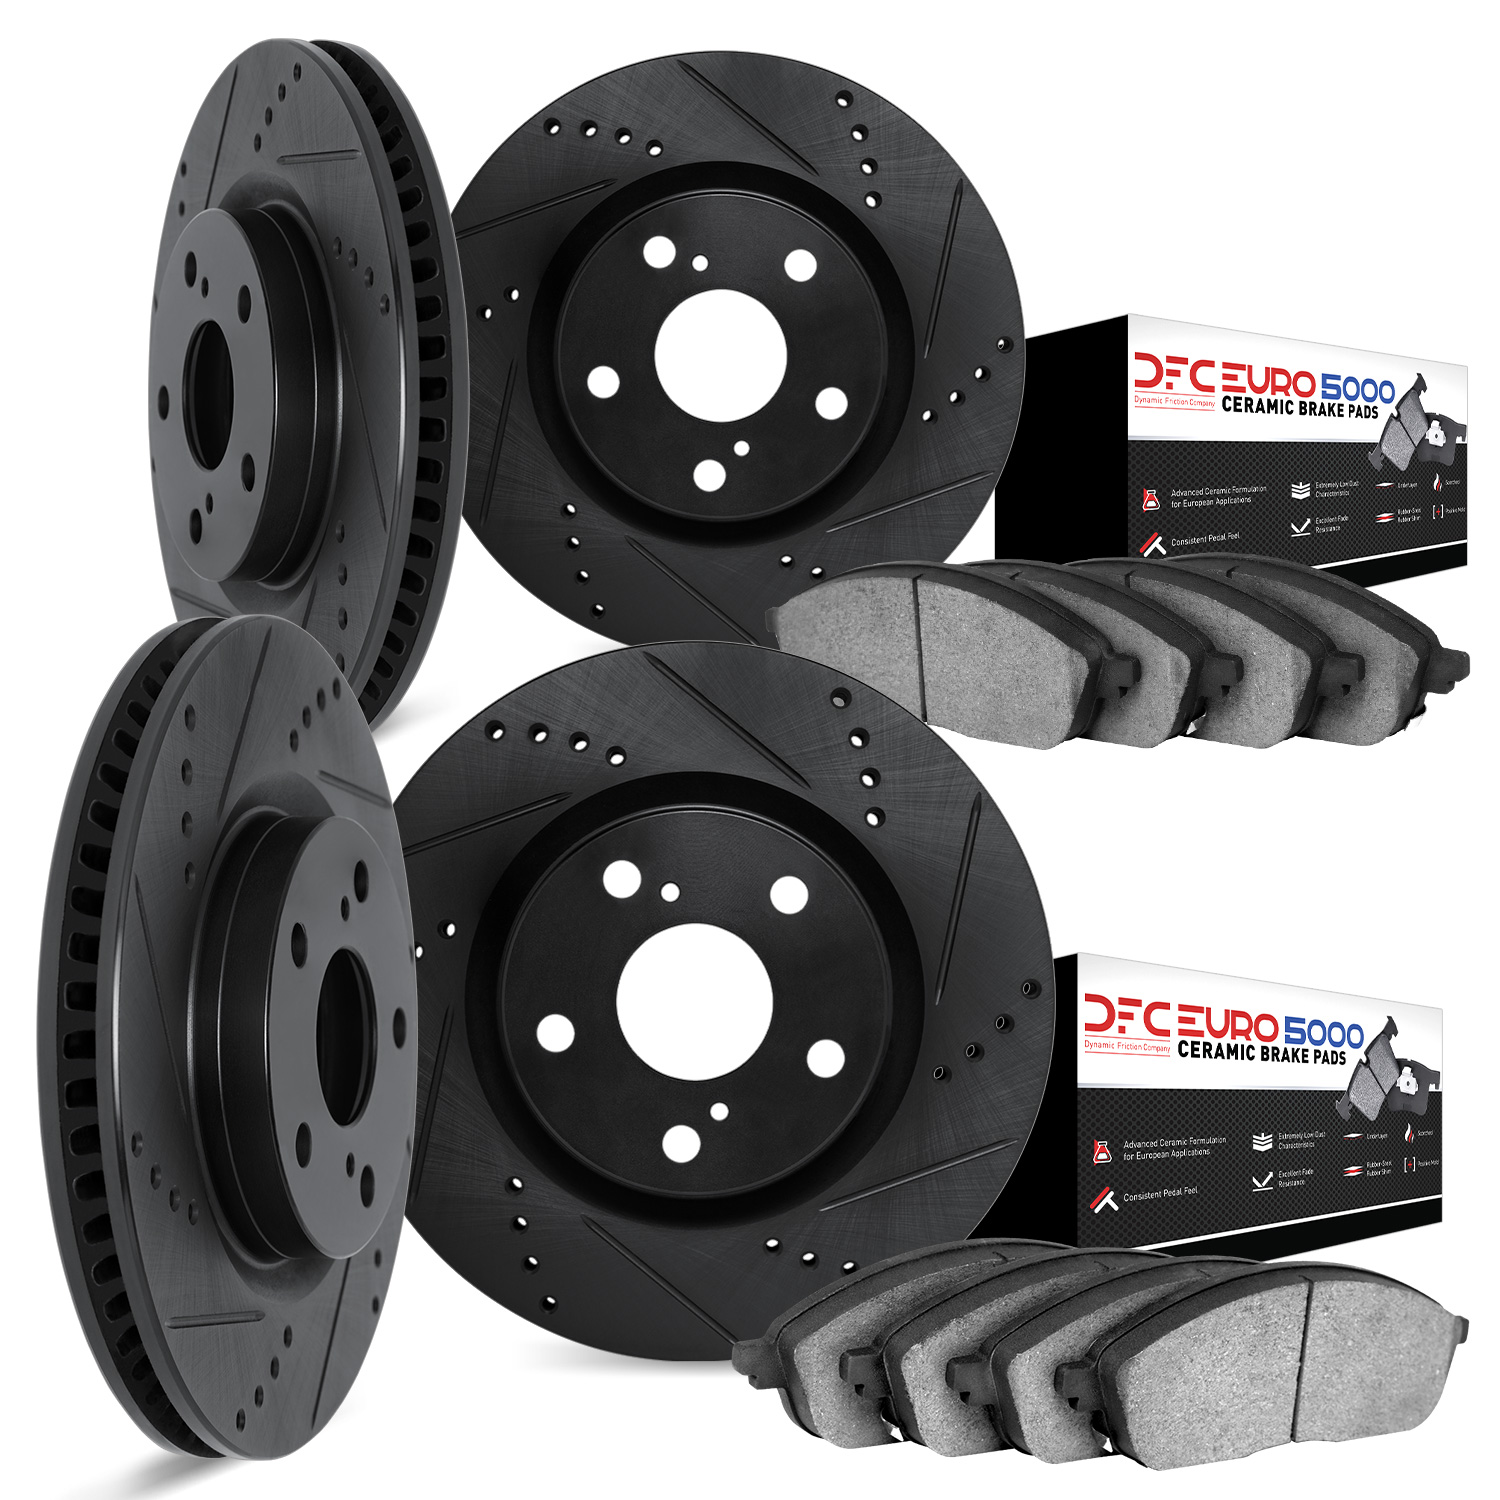 8604-31019 Drilled/Slotted Brake Rotors w/5000 Euro Ceramic Brake Pads Kit [Black], 2008-2010 BMW, Position: Front and Rear